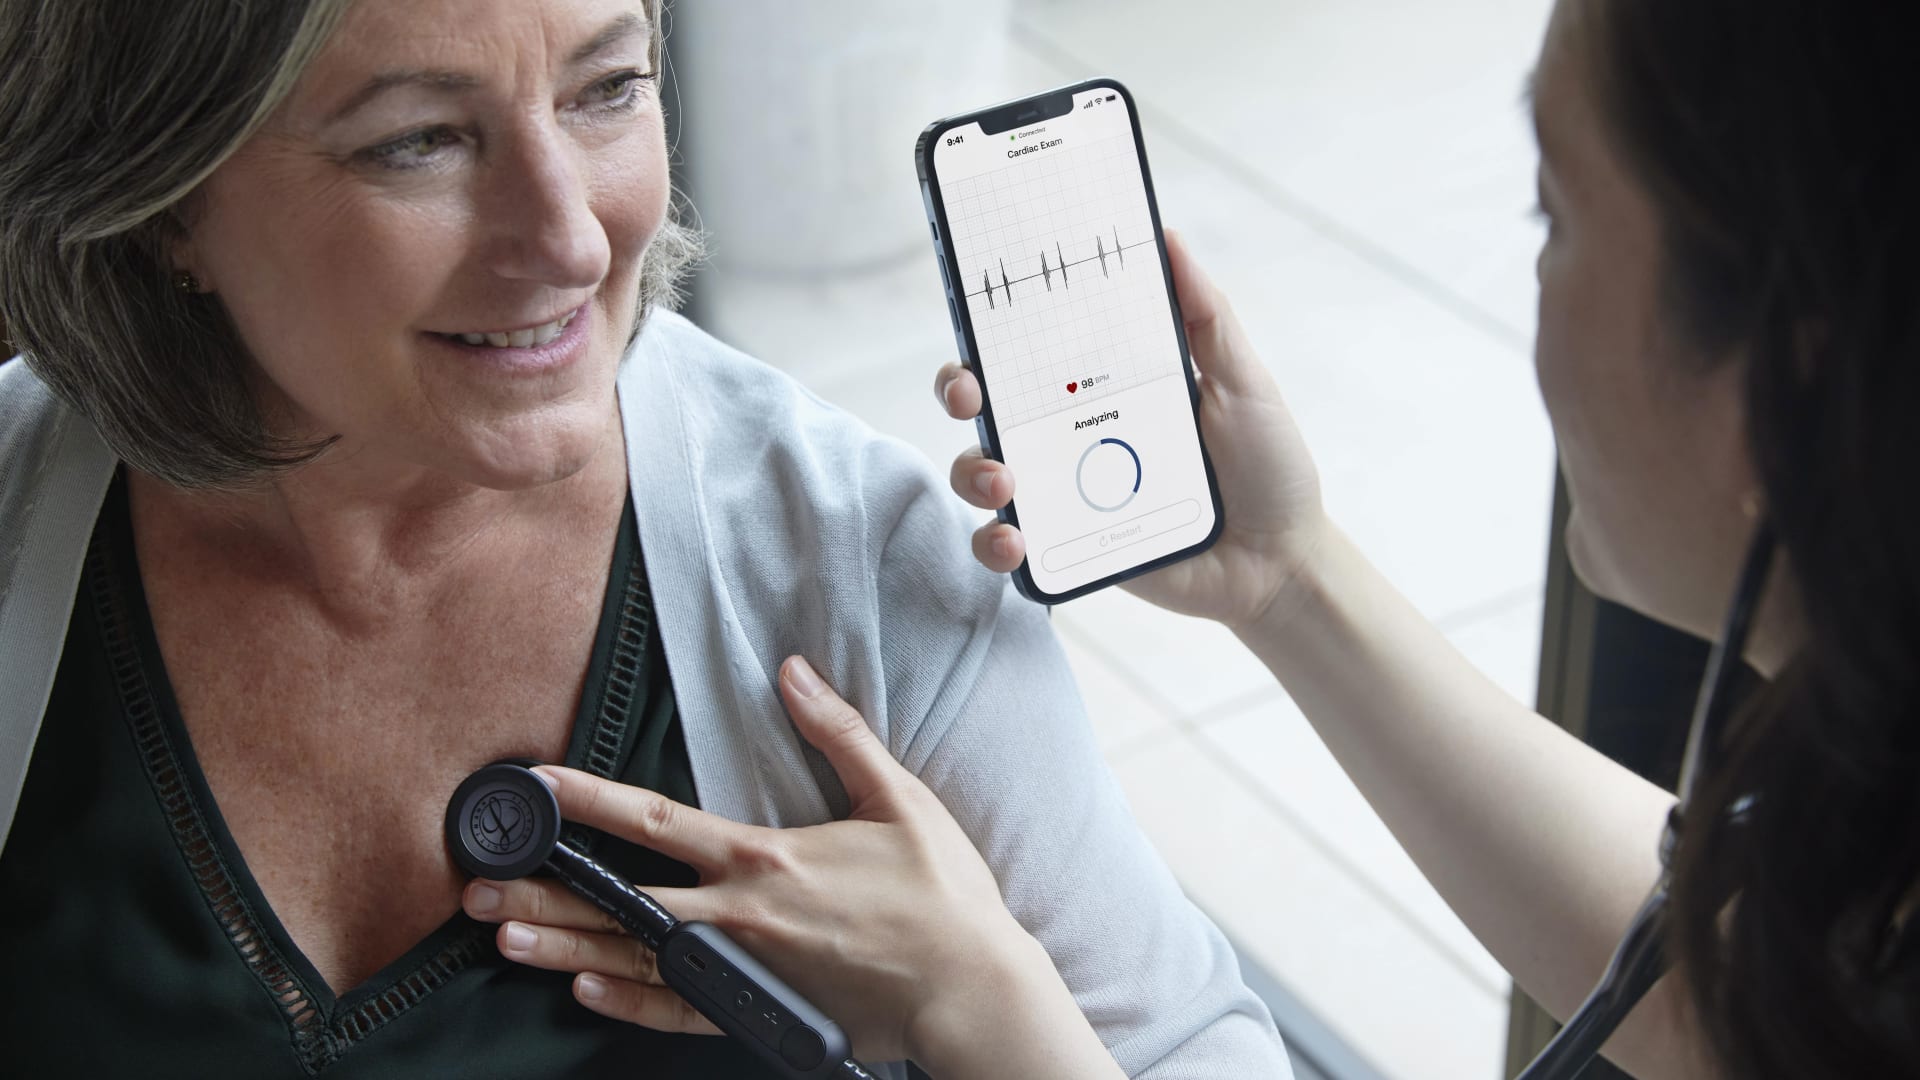 An Eko stethoscope paired with its mobile app.